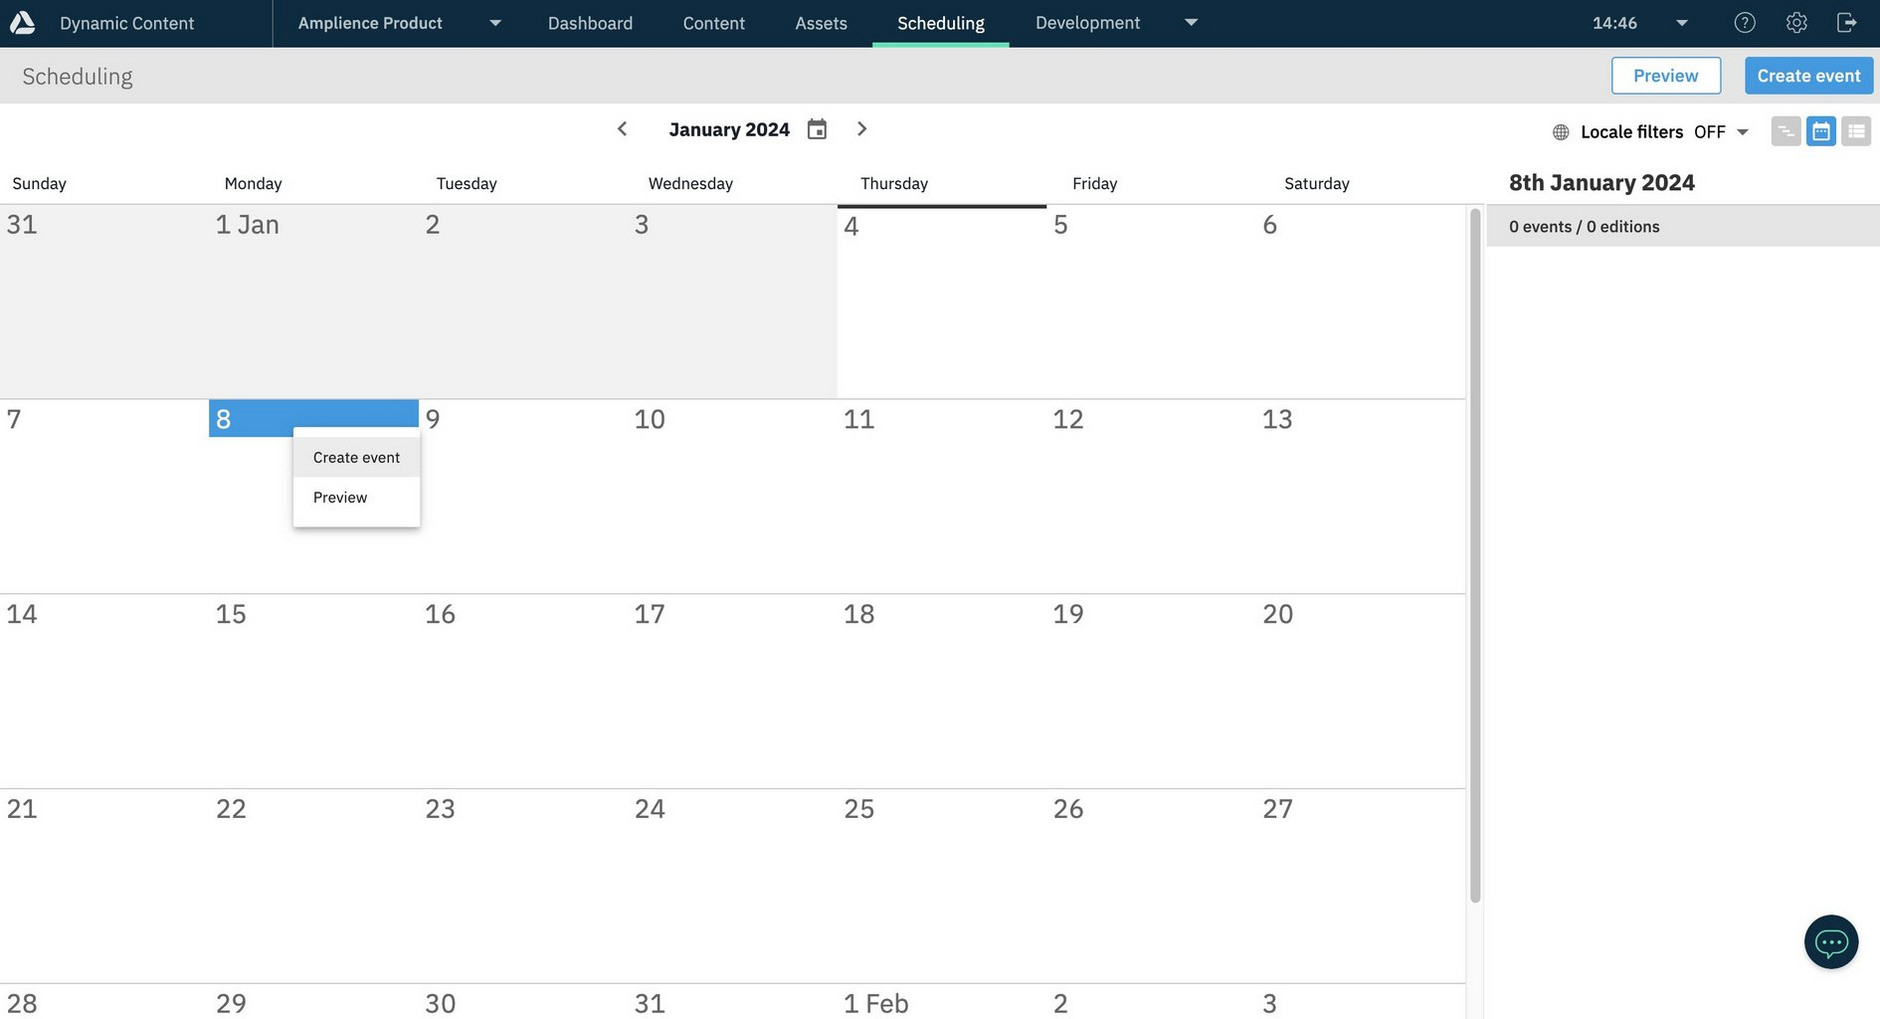 Events are created from the calendar, list or timeline views